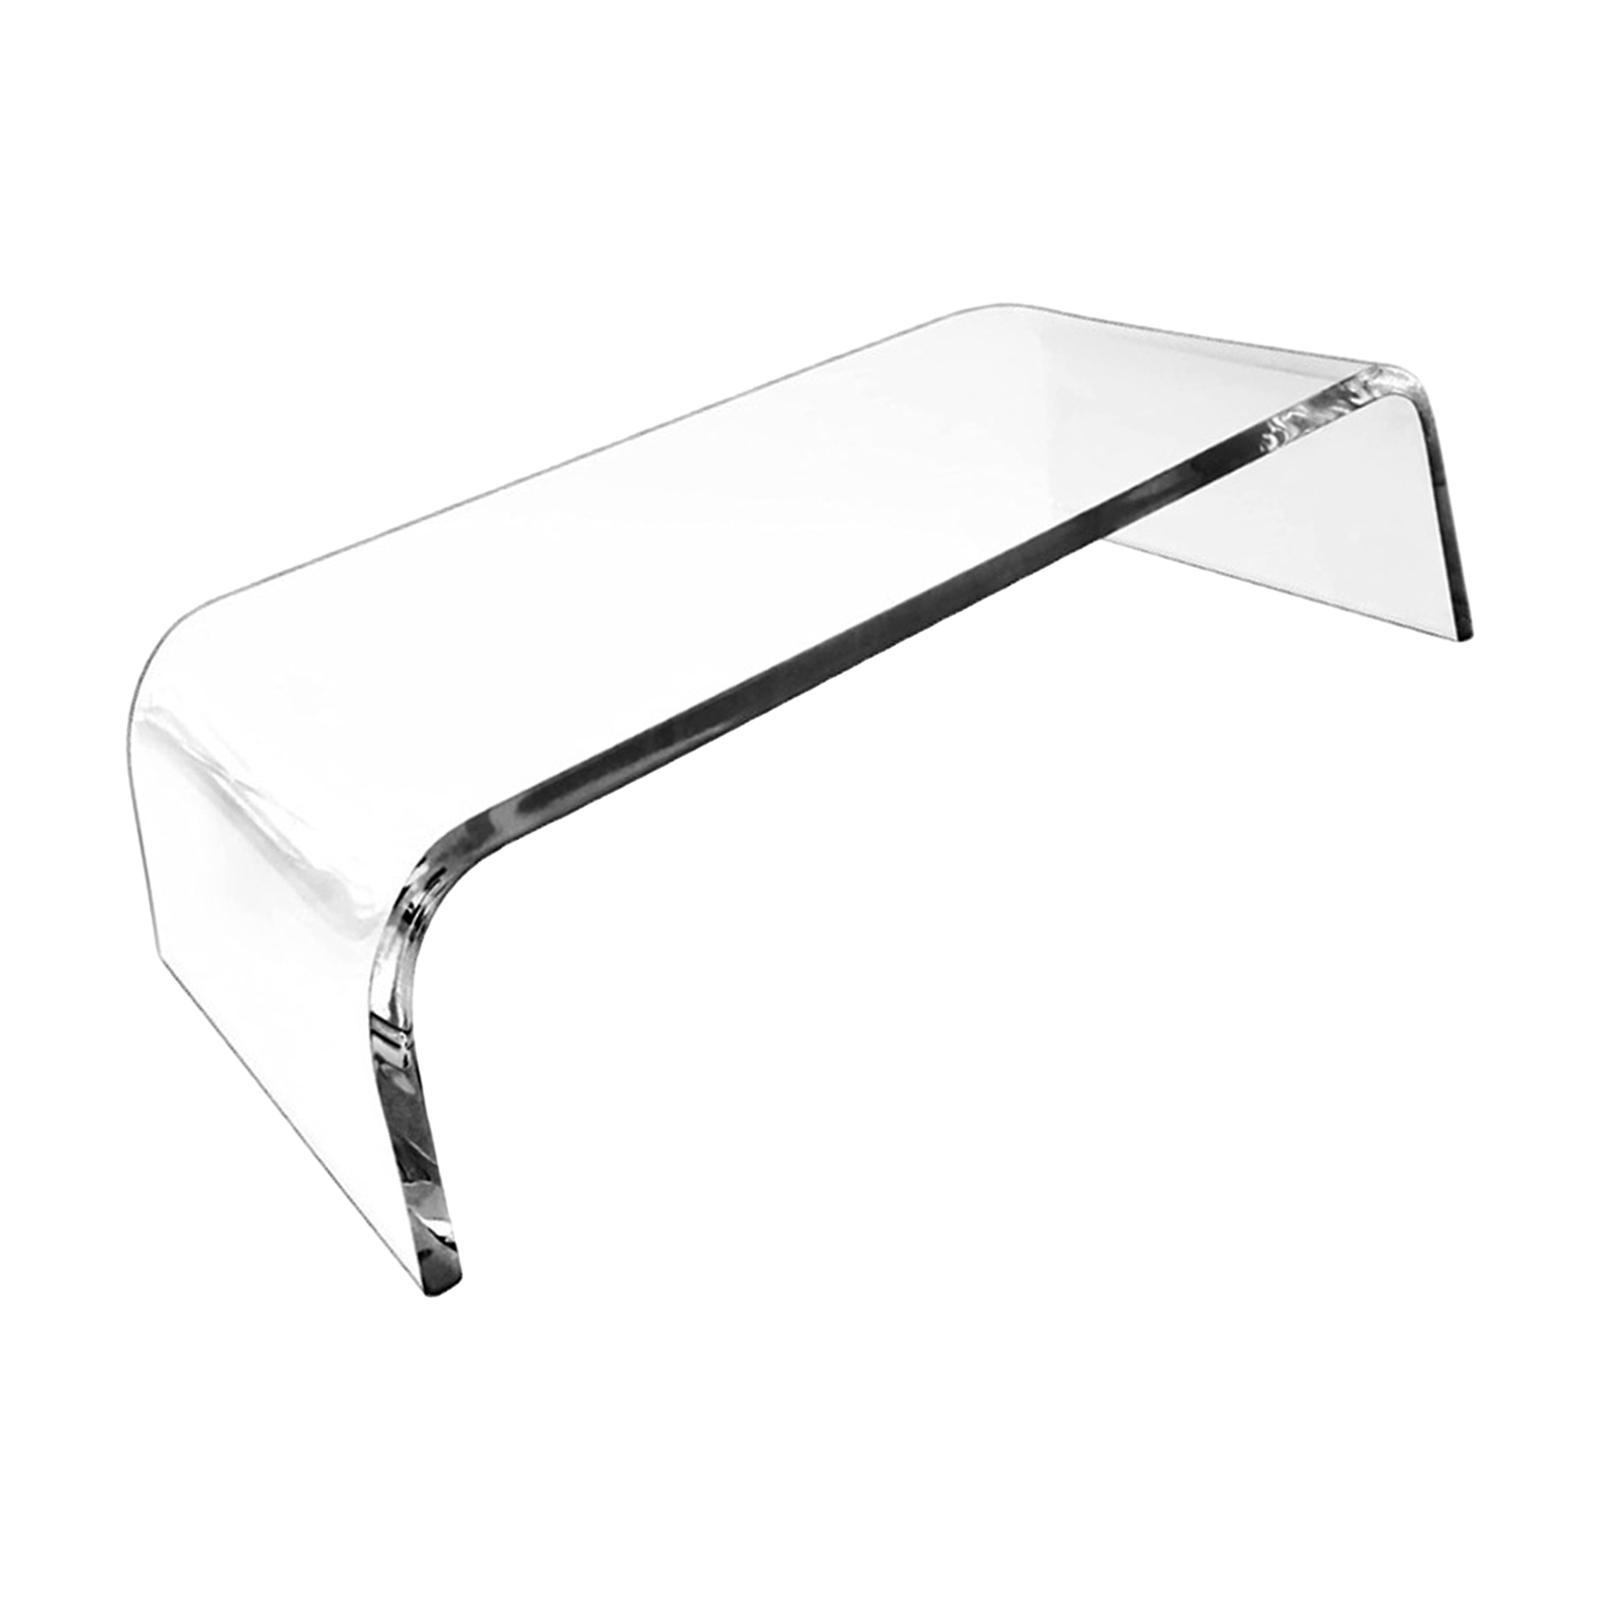 PC Stand Clear Computer Monitor Stand Desk Storage Rack for Desk Office Home